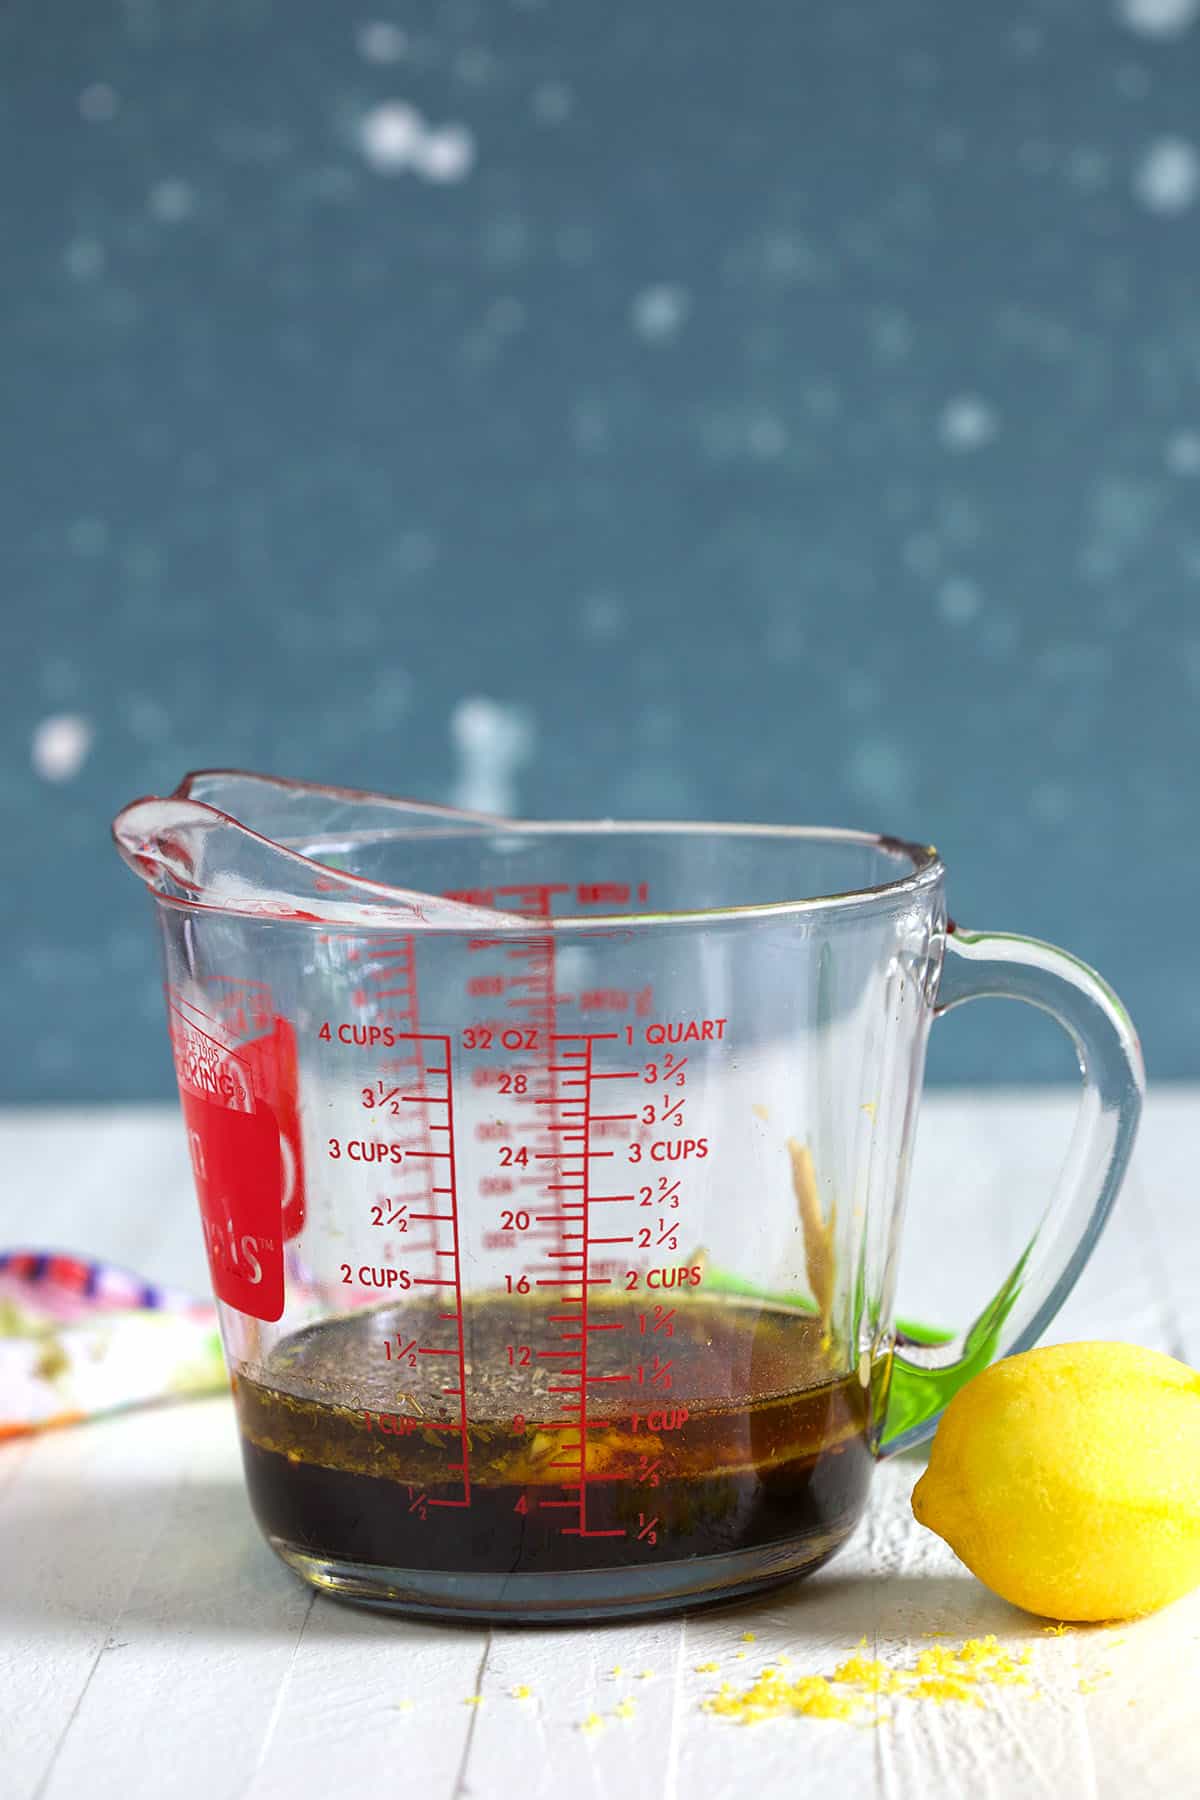 A measuring cup is placed next to a lemon on a white surface. 